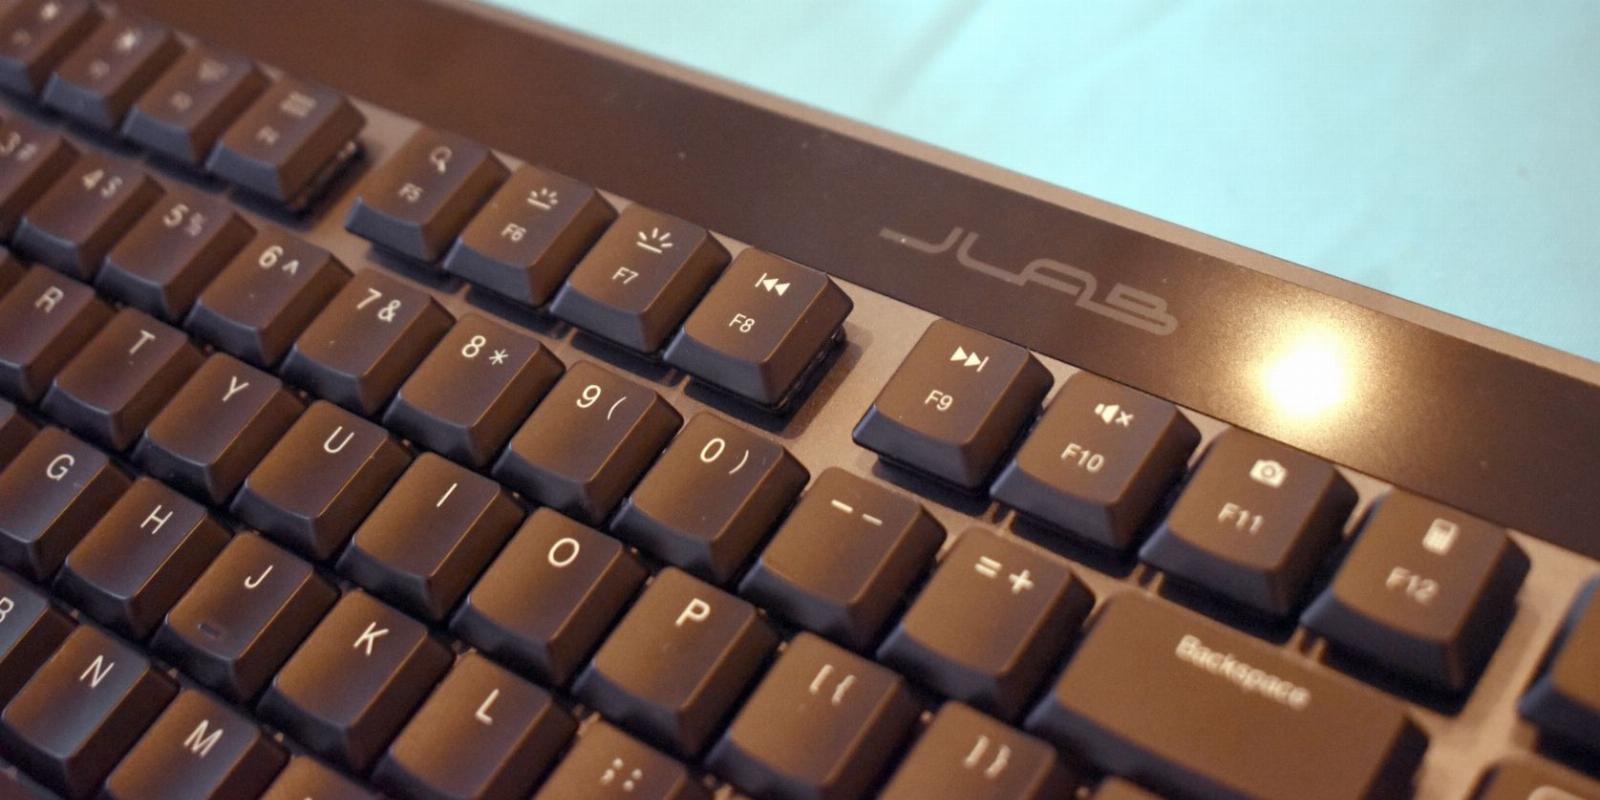 JLab Launches New Silent Epic Mechanical Keyboard at CES 2023